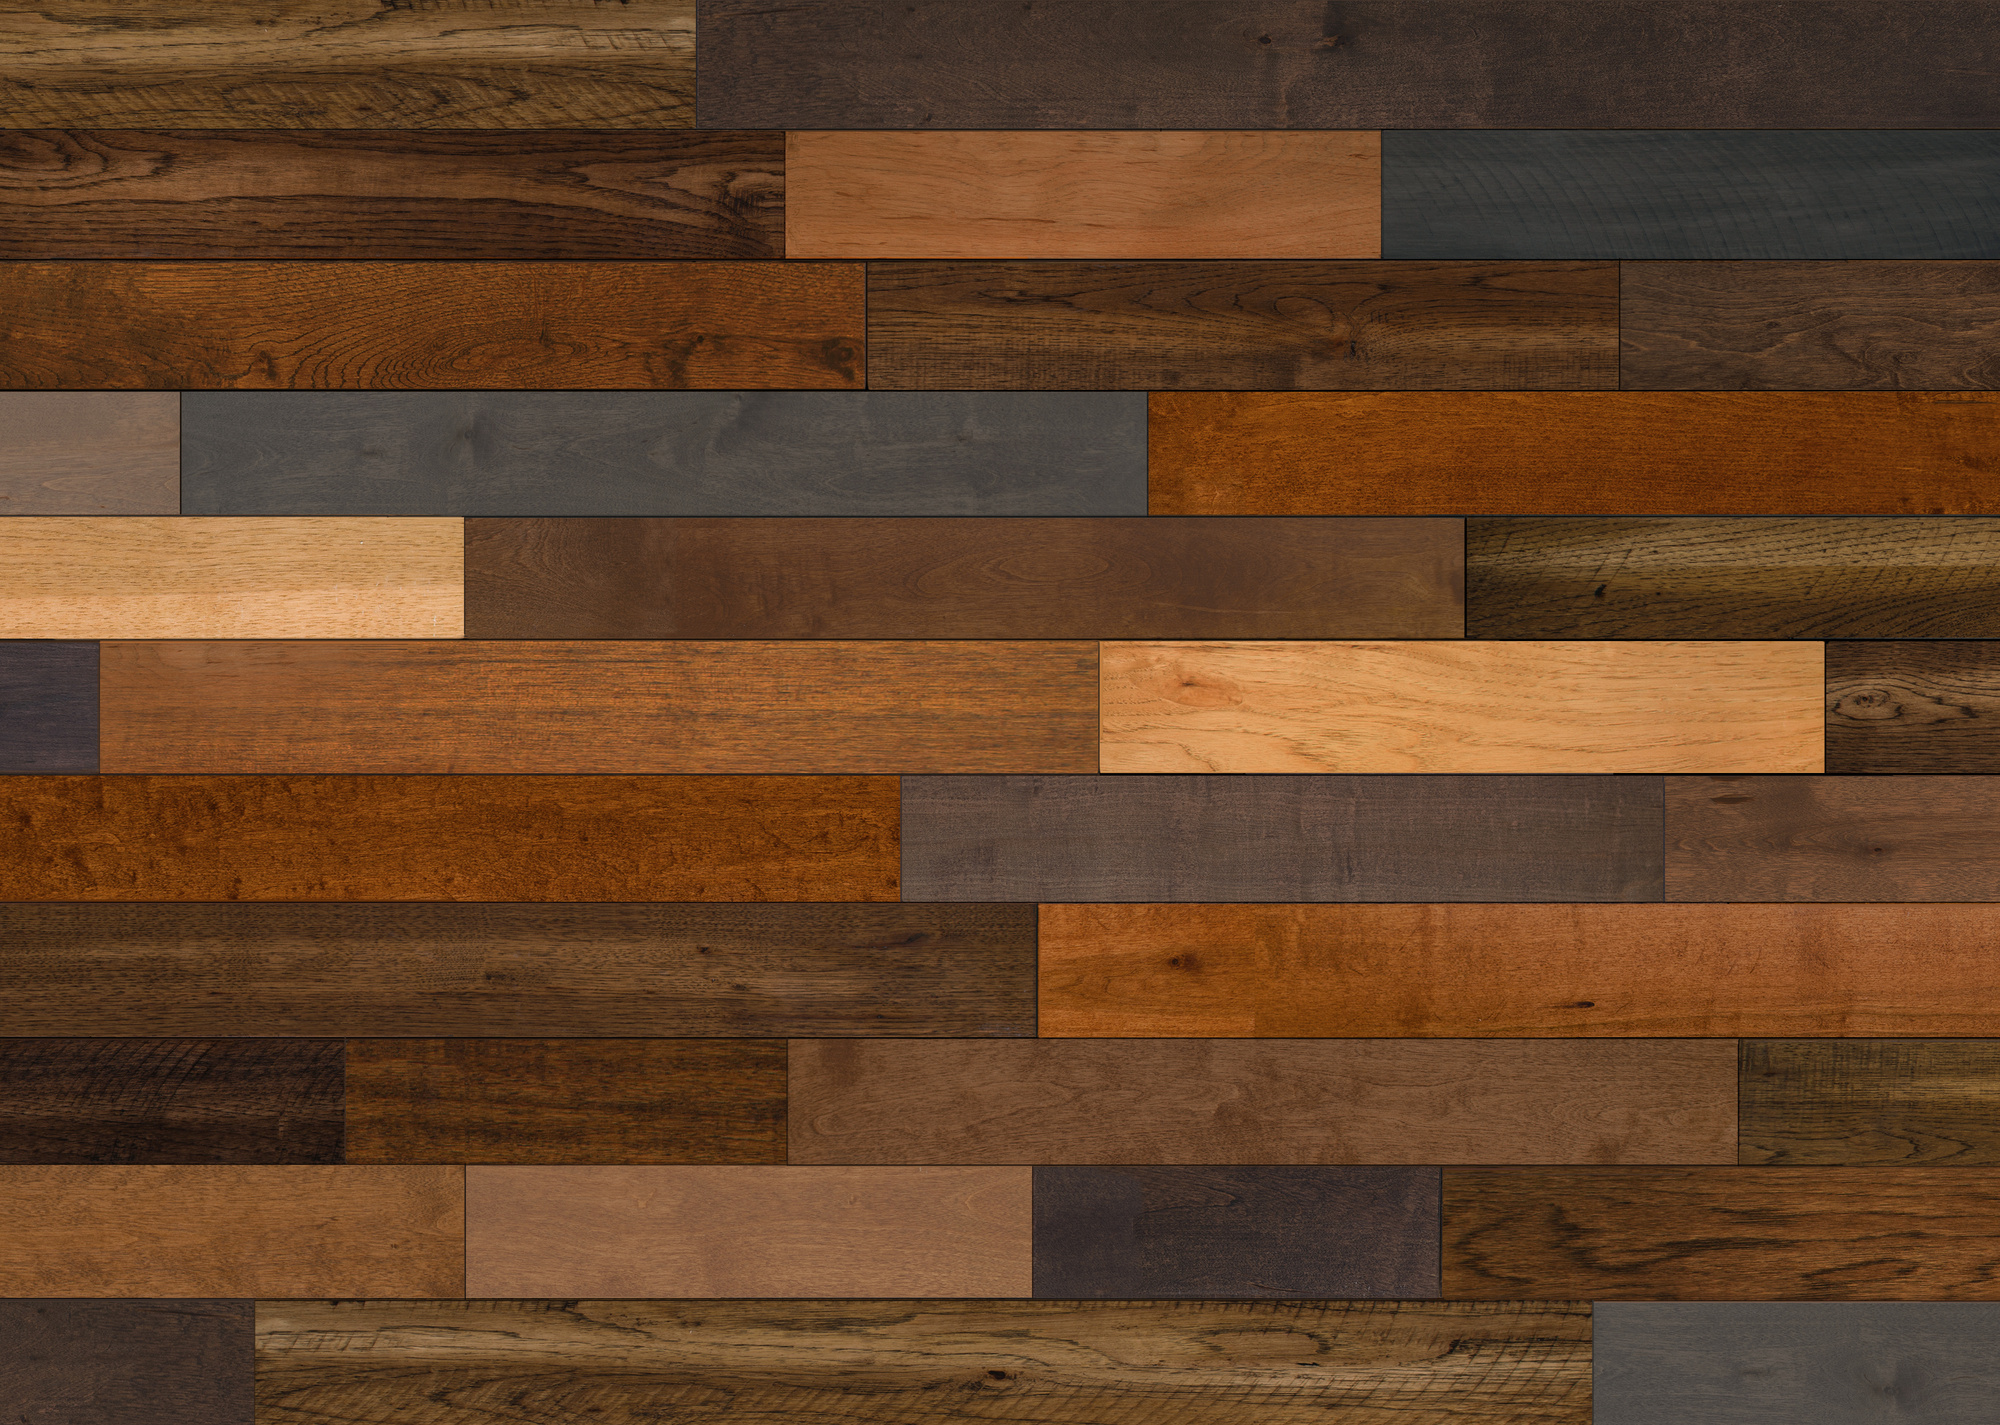 mixed species wood flooring pattern for background texture or interior